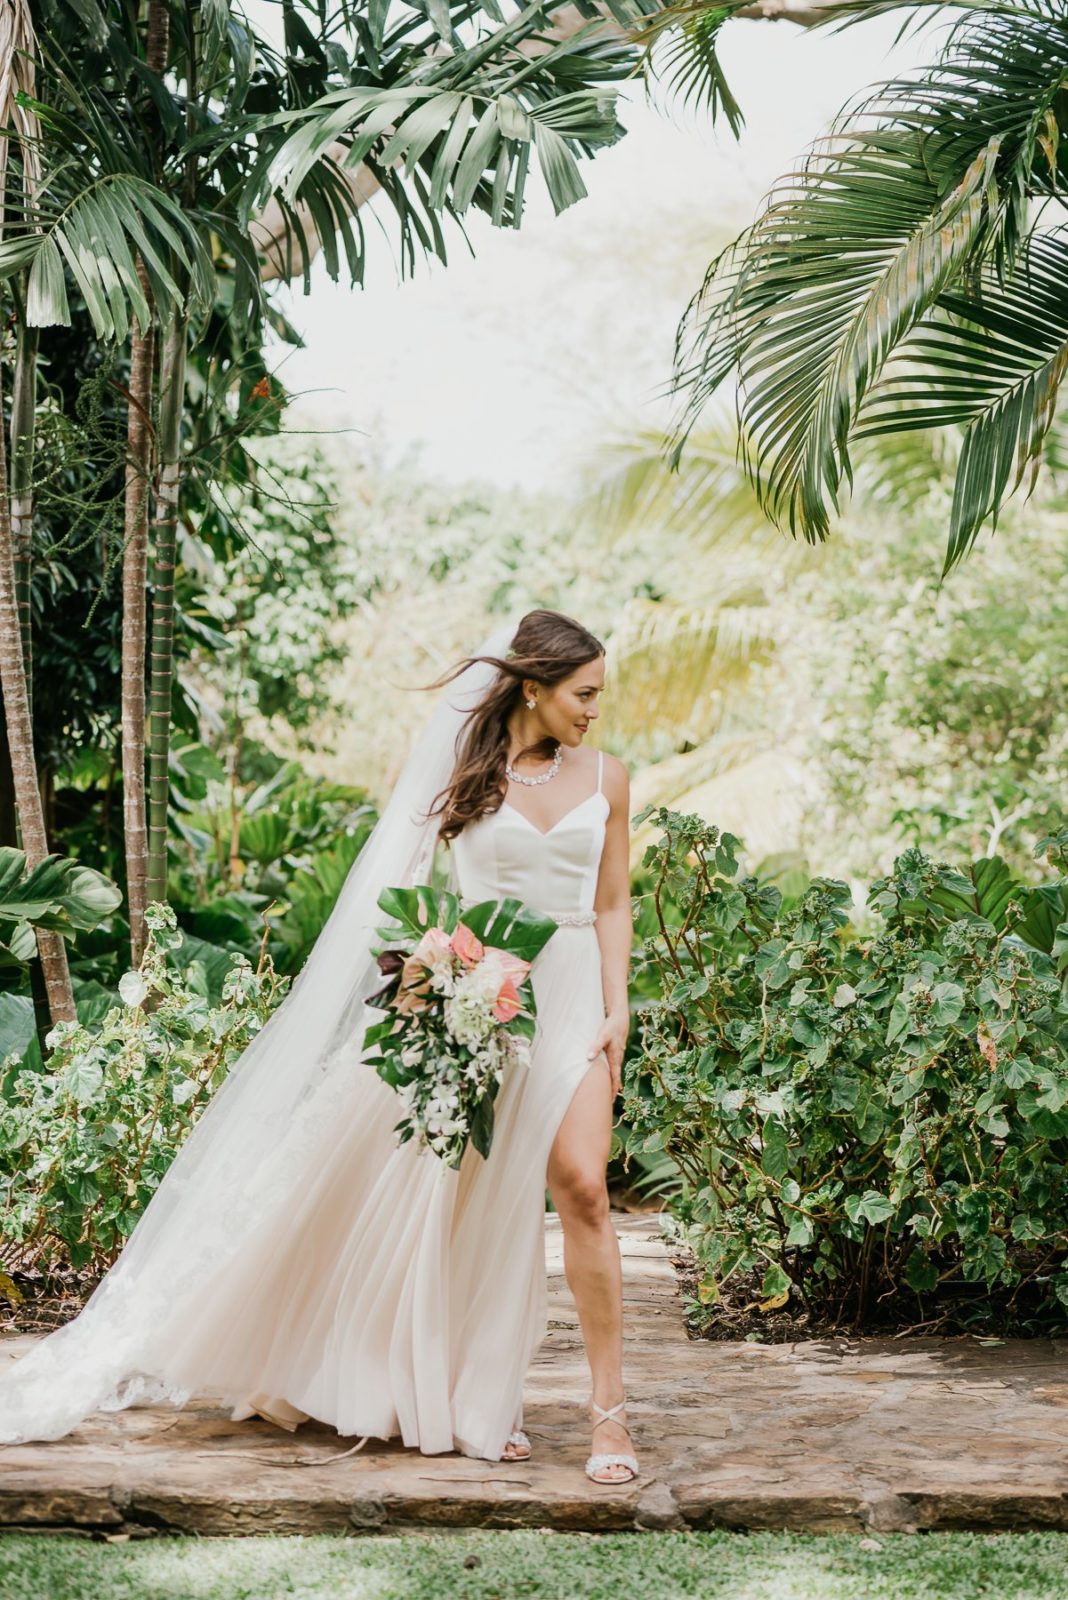 How To Become A Destination Wedding Planner